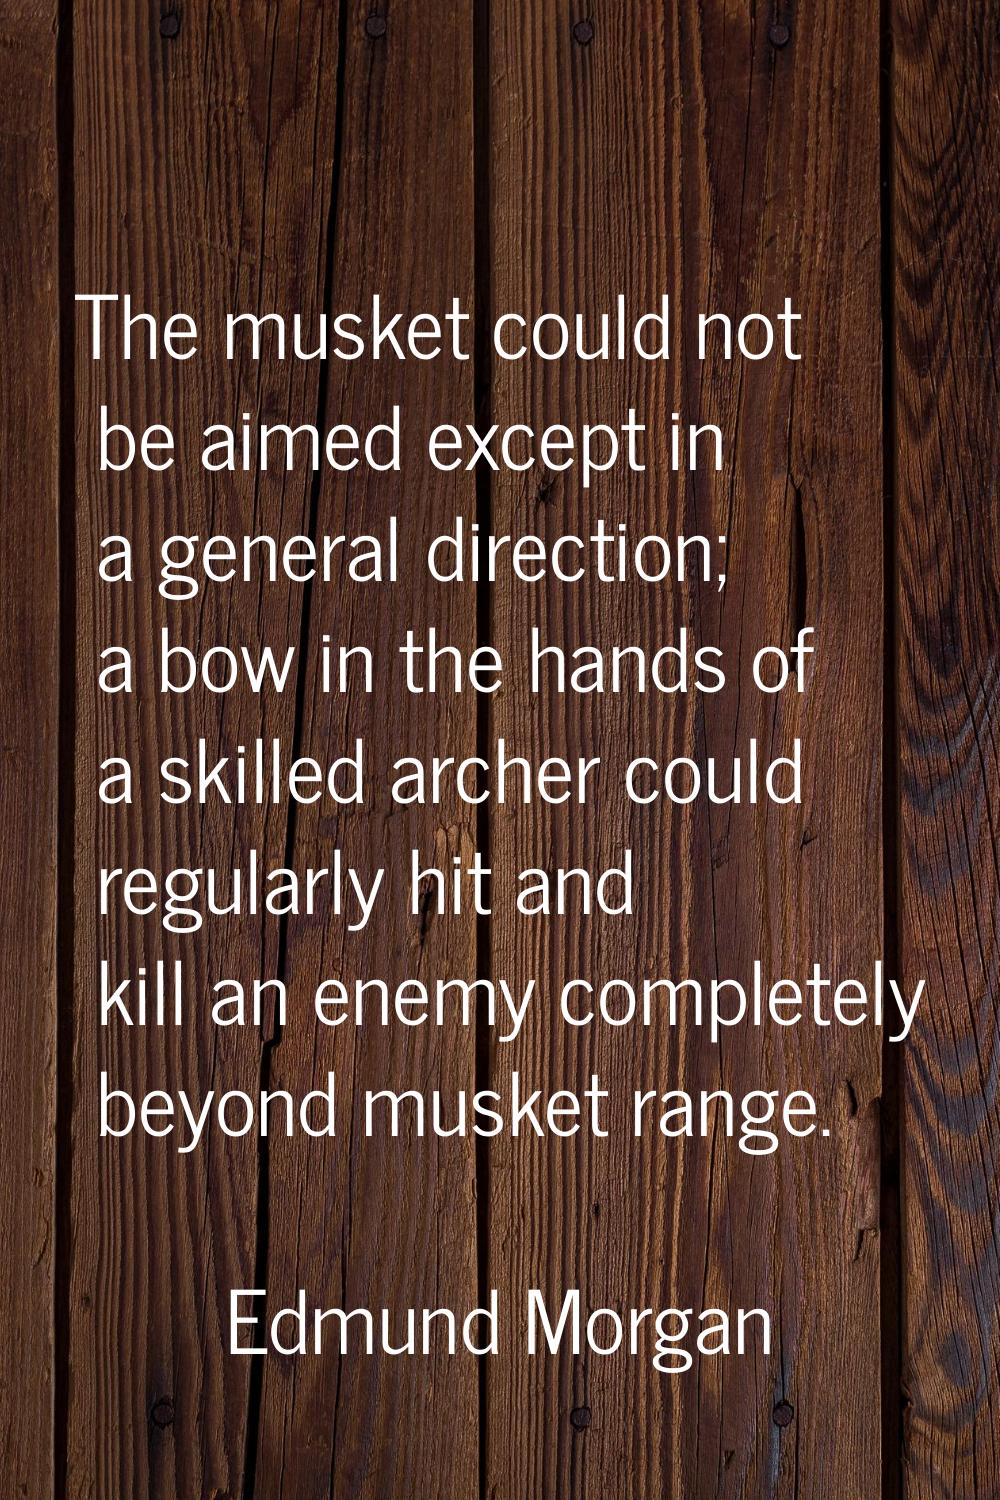 The musket could not be aimed except in a general direction; a bow in the hands of a skilled archer